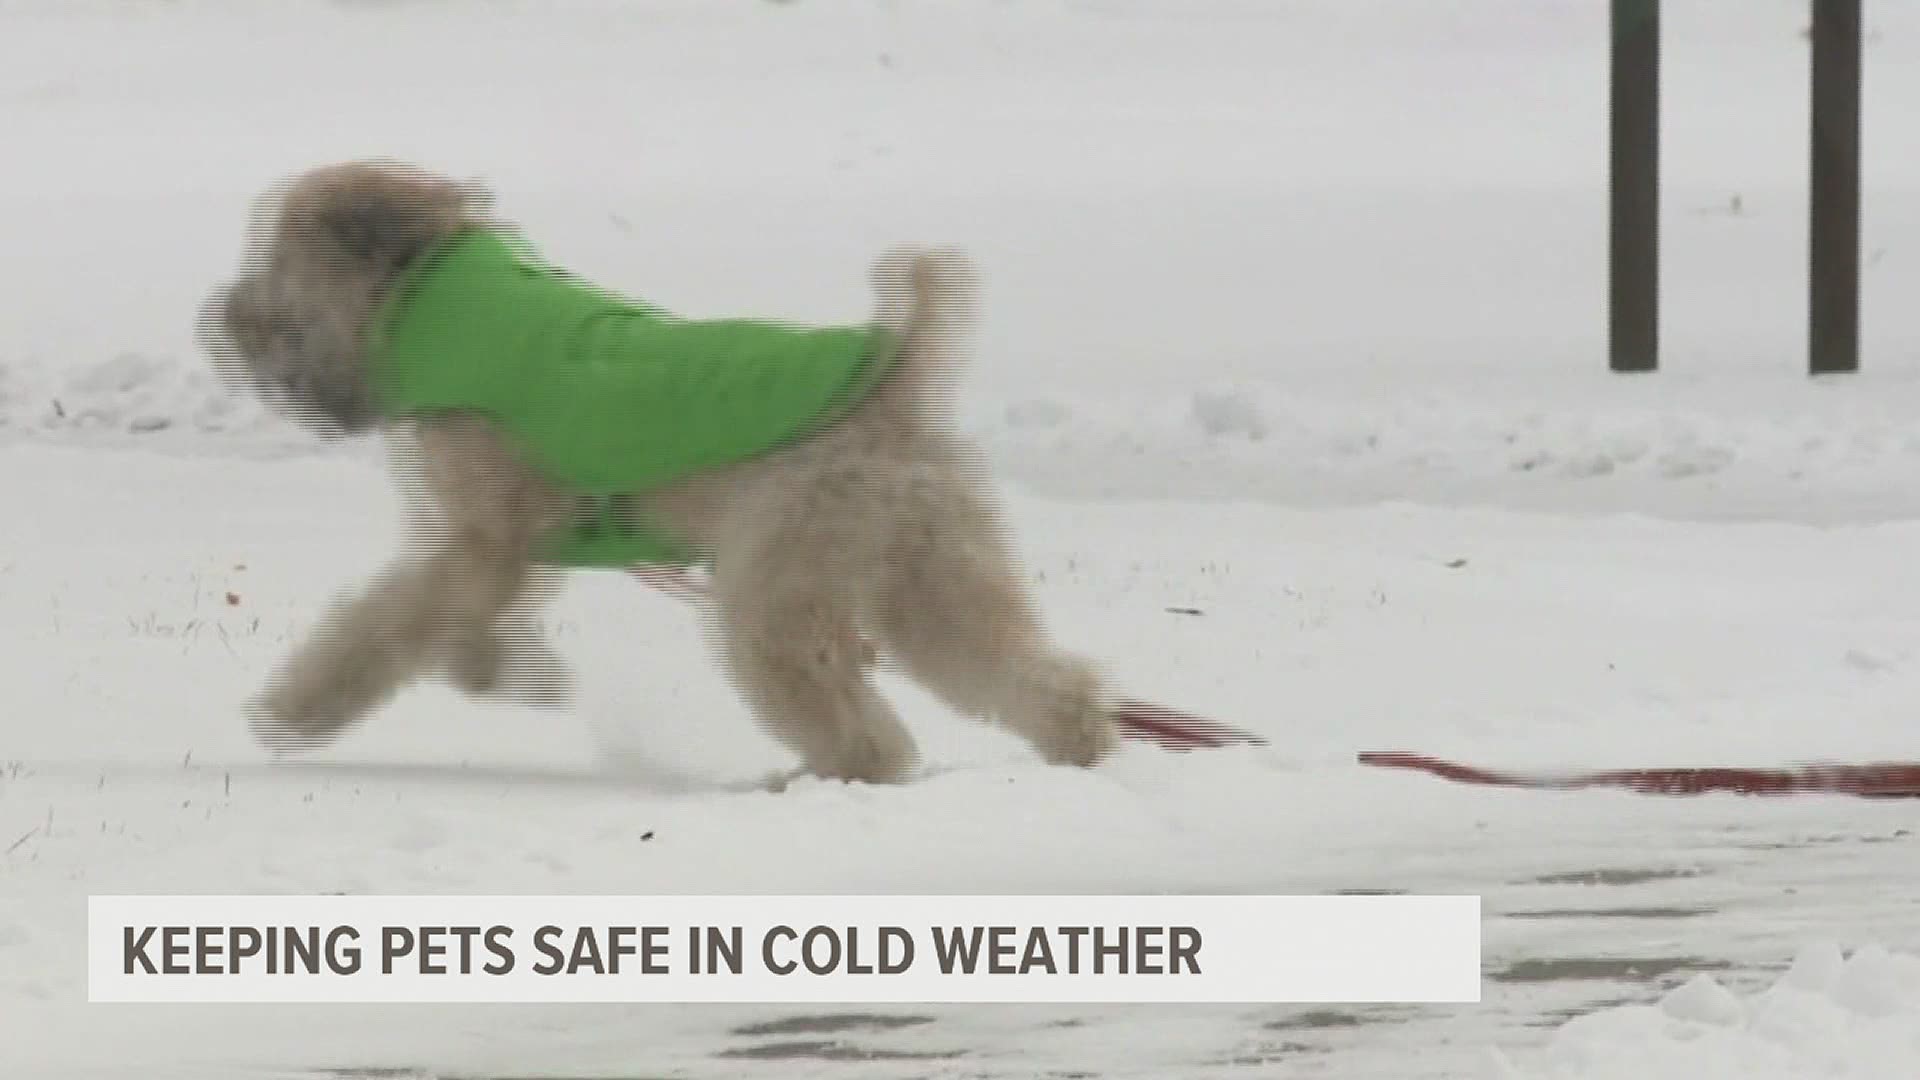 Dr. Bill Lewis from Lincoln Highway Vet Clinic shares tips on keeping our pets safe in the cold Winter months